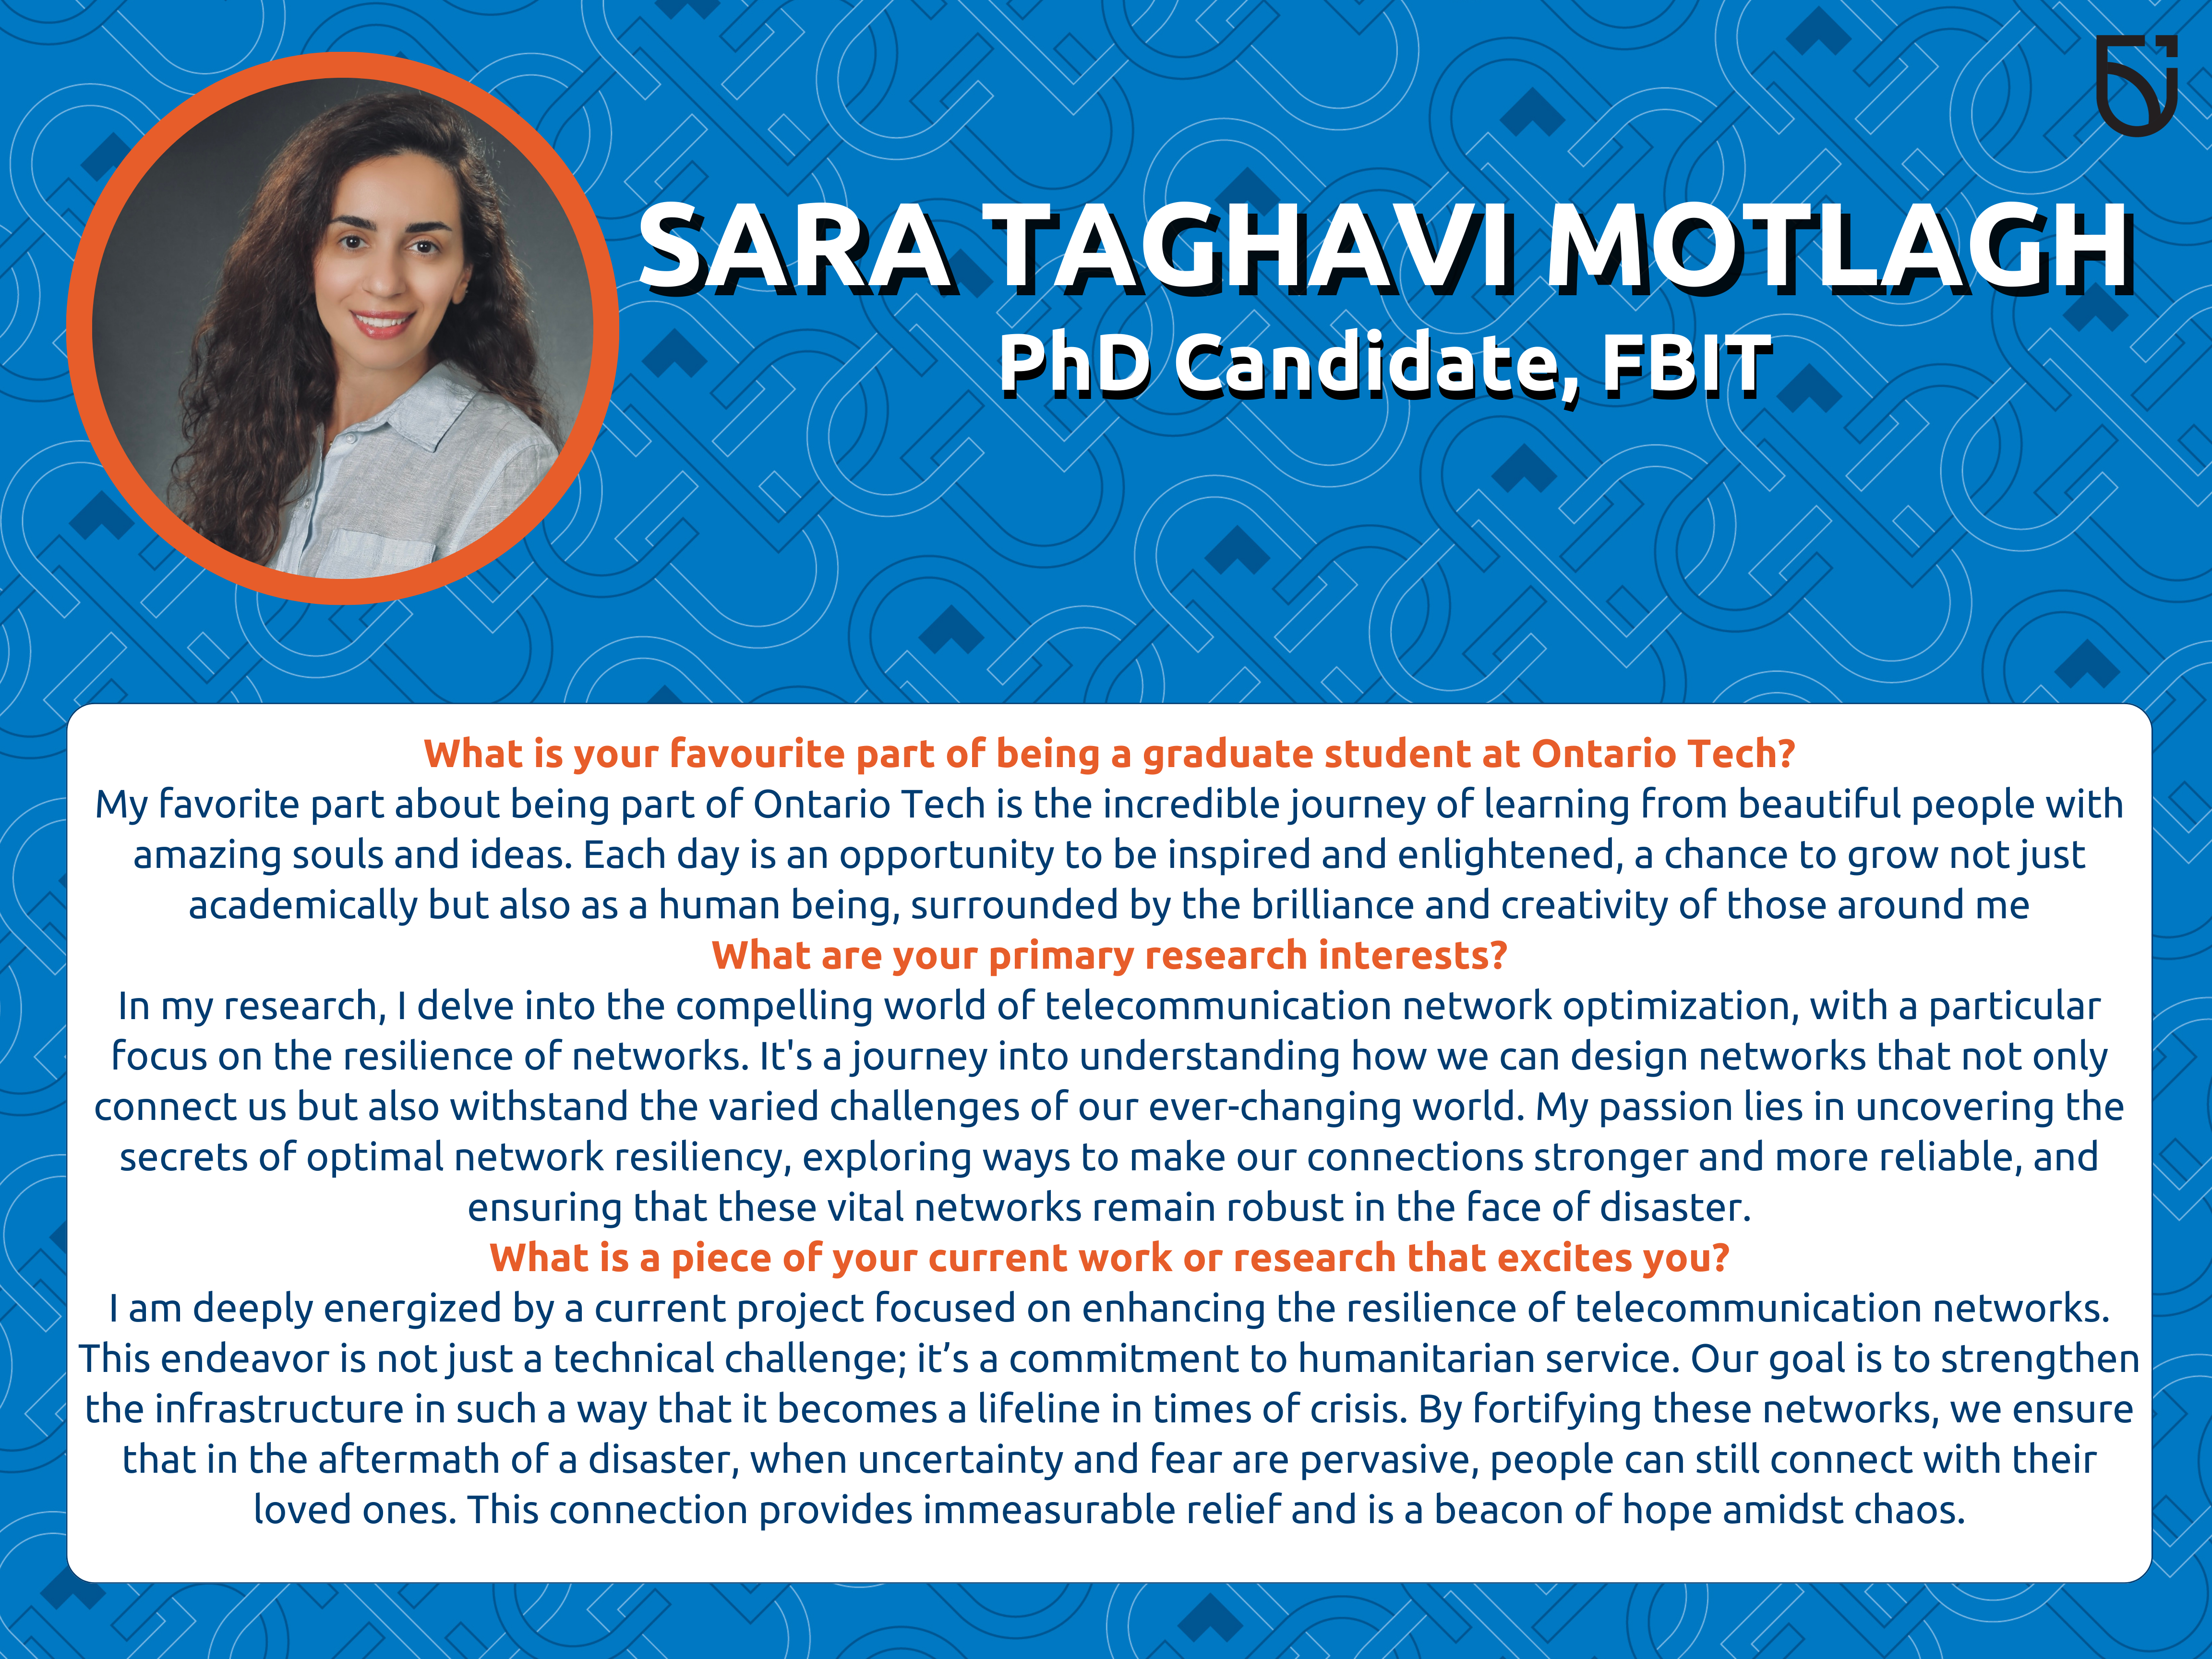 This photo is a Women’s Wednesday feature of Sarah Motlagh, a PhD Candidate in the Faculty of Business & IT